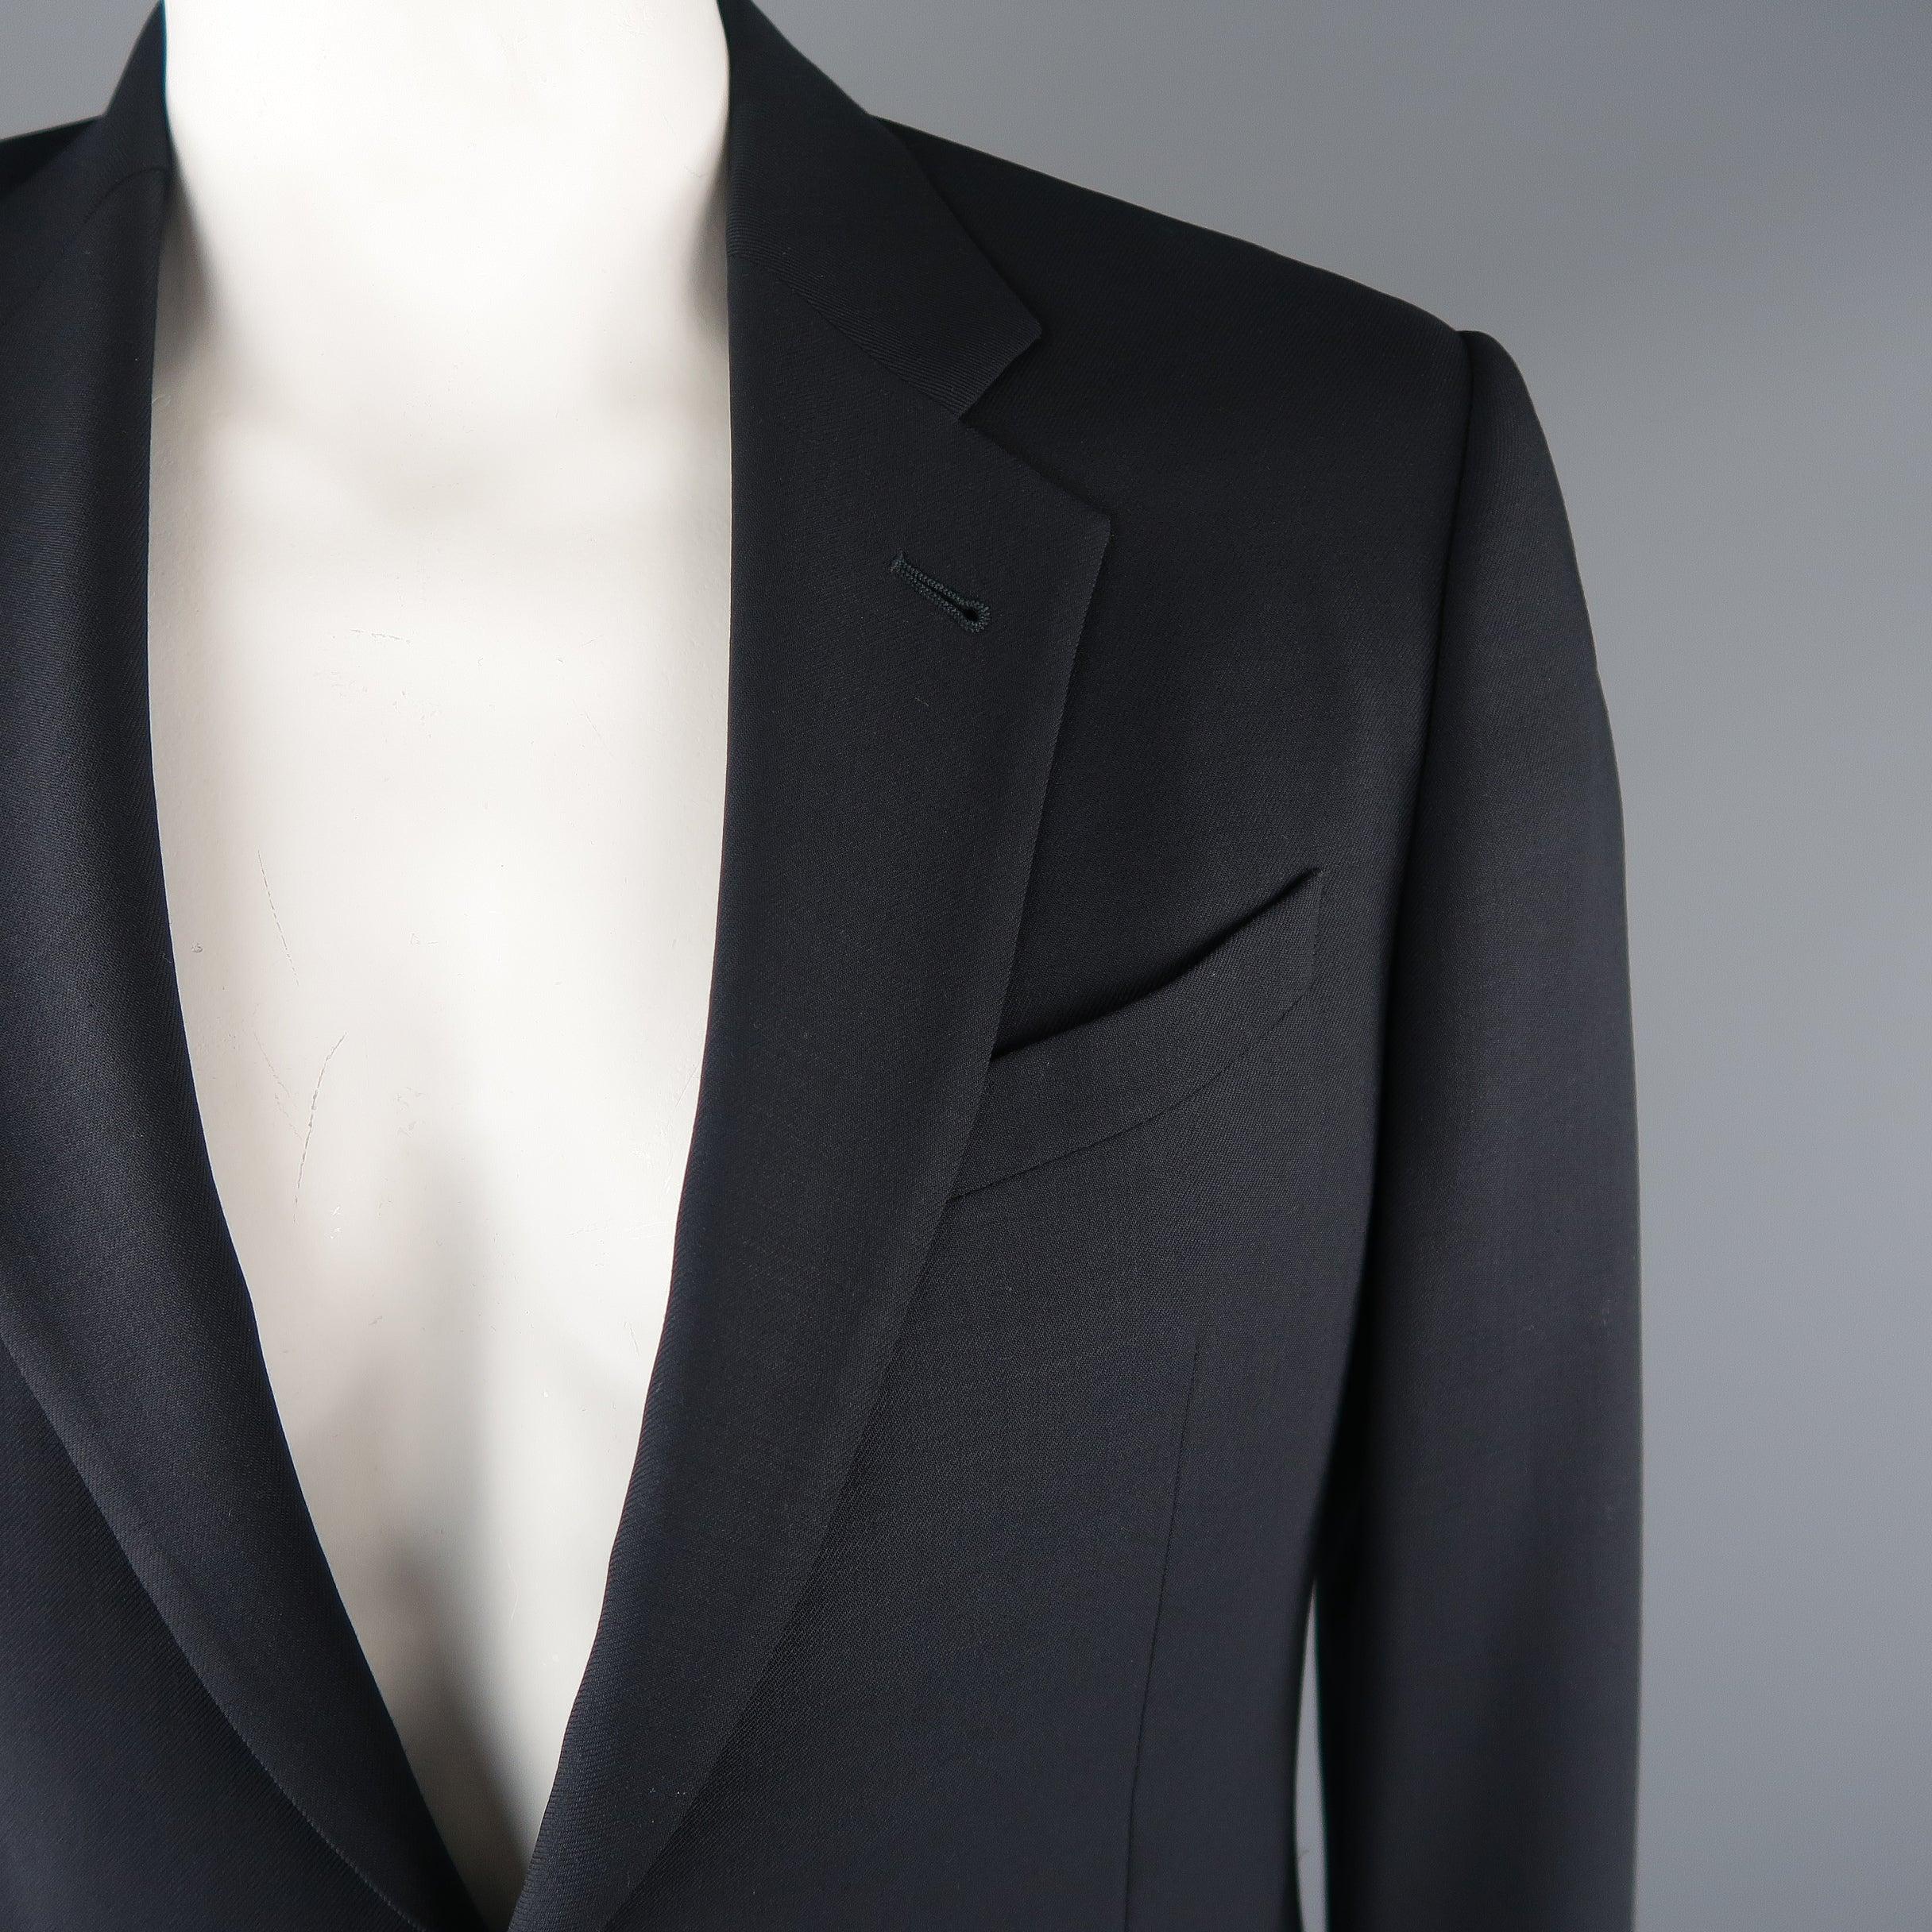 ARMANI COLLEZIONI 42 Regular Navy Solid Wool Blazer / Sport Coat In Excellent Condition For Sale In San Francisco, CA